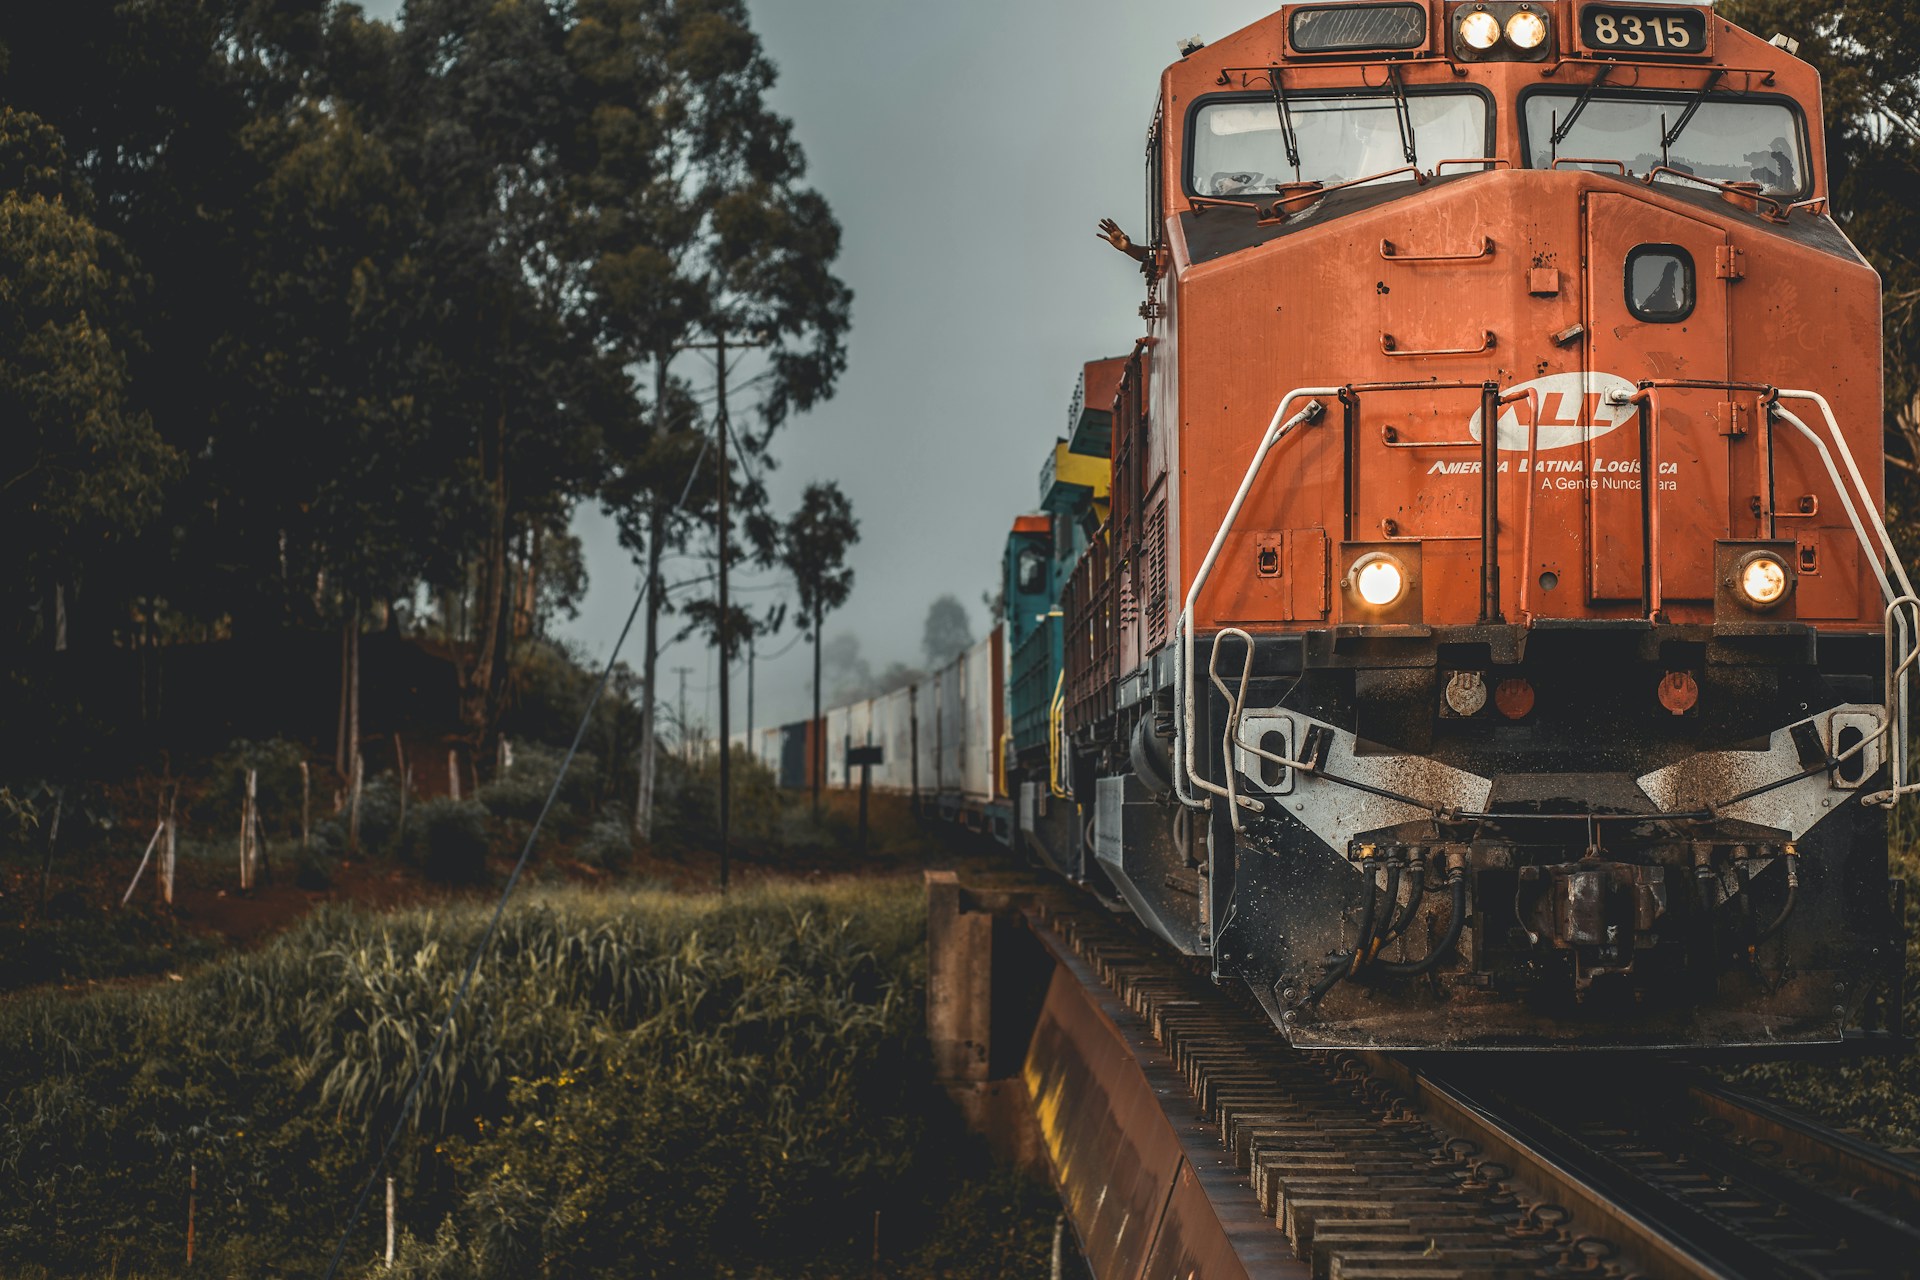 Description: A head-on photo of a red-orange locomotive engine.  A trail of attached rail cars is visible behind it.  There are trees to one side of the tracks.  Photo by Guilherme Stecanella on Unsplash.